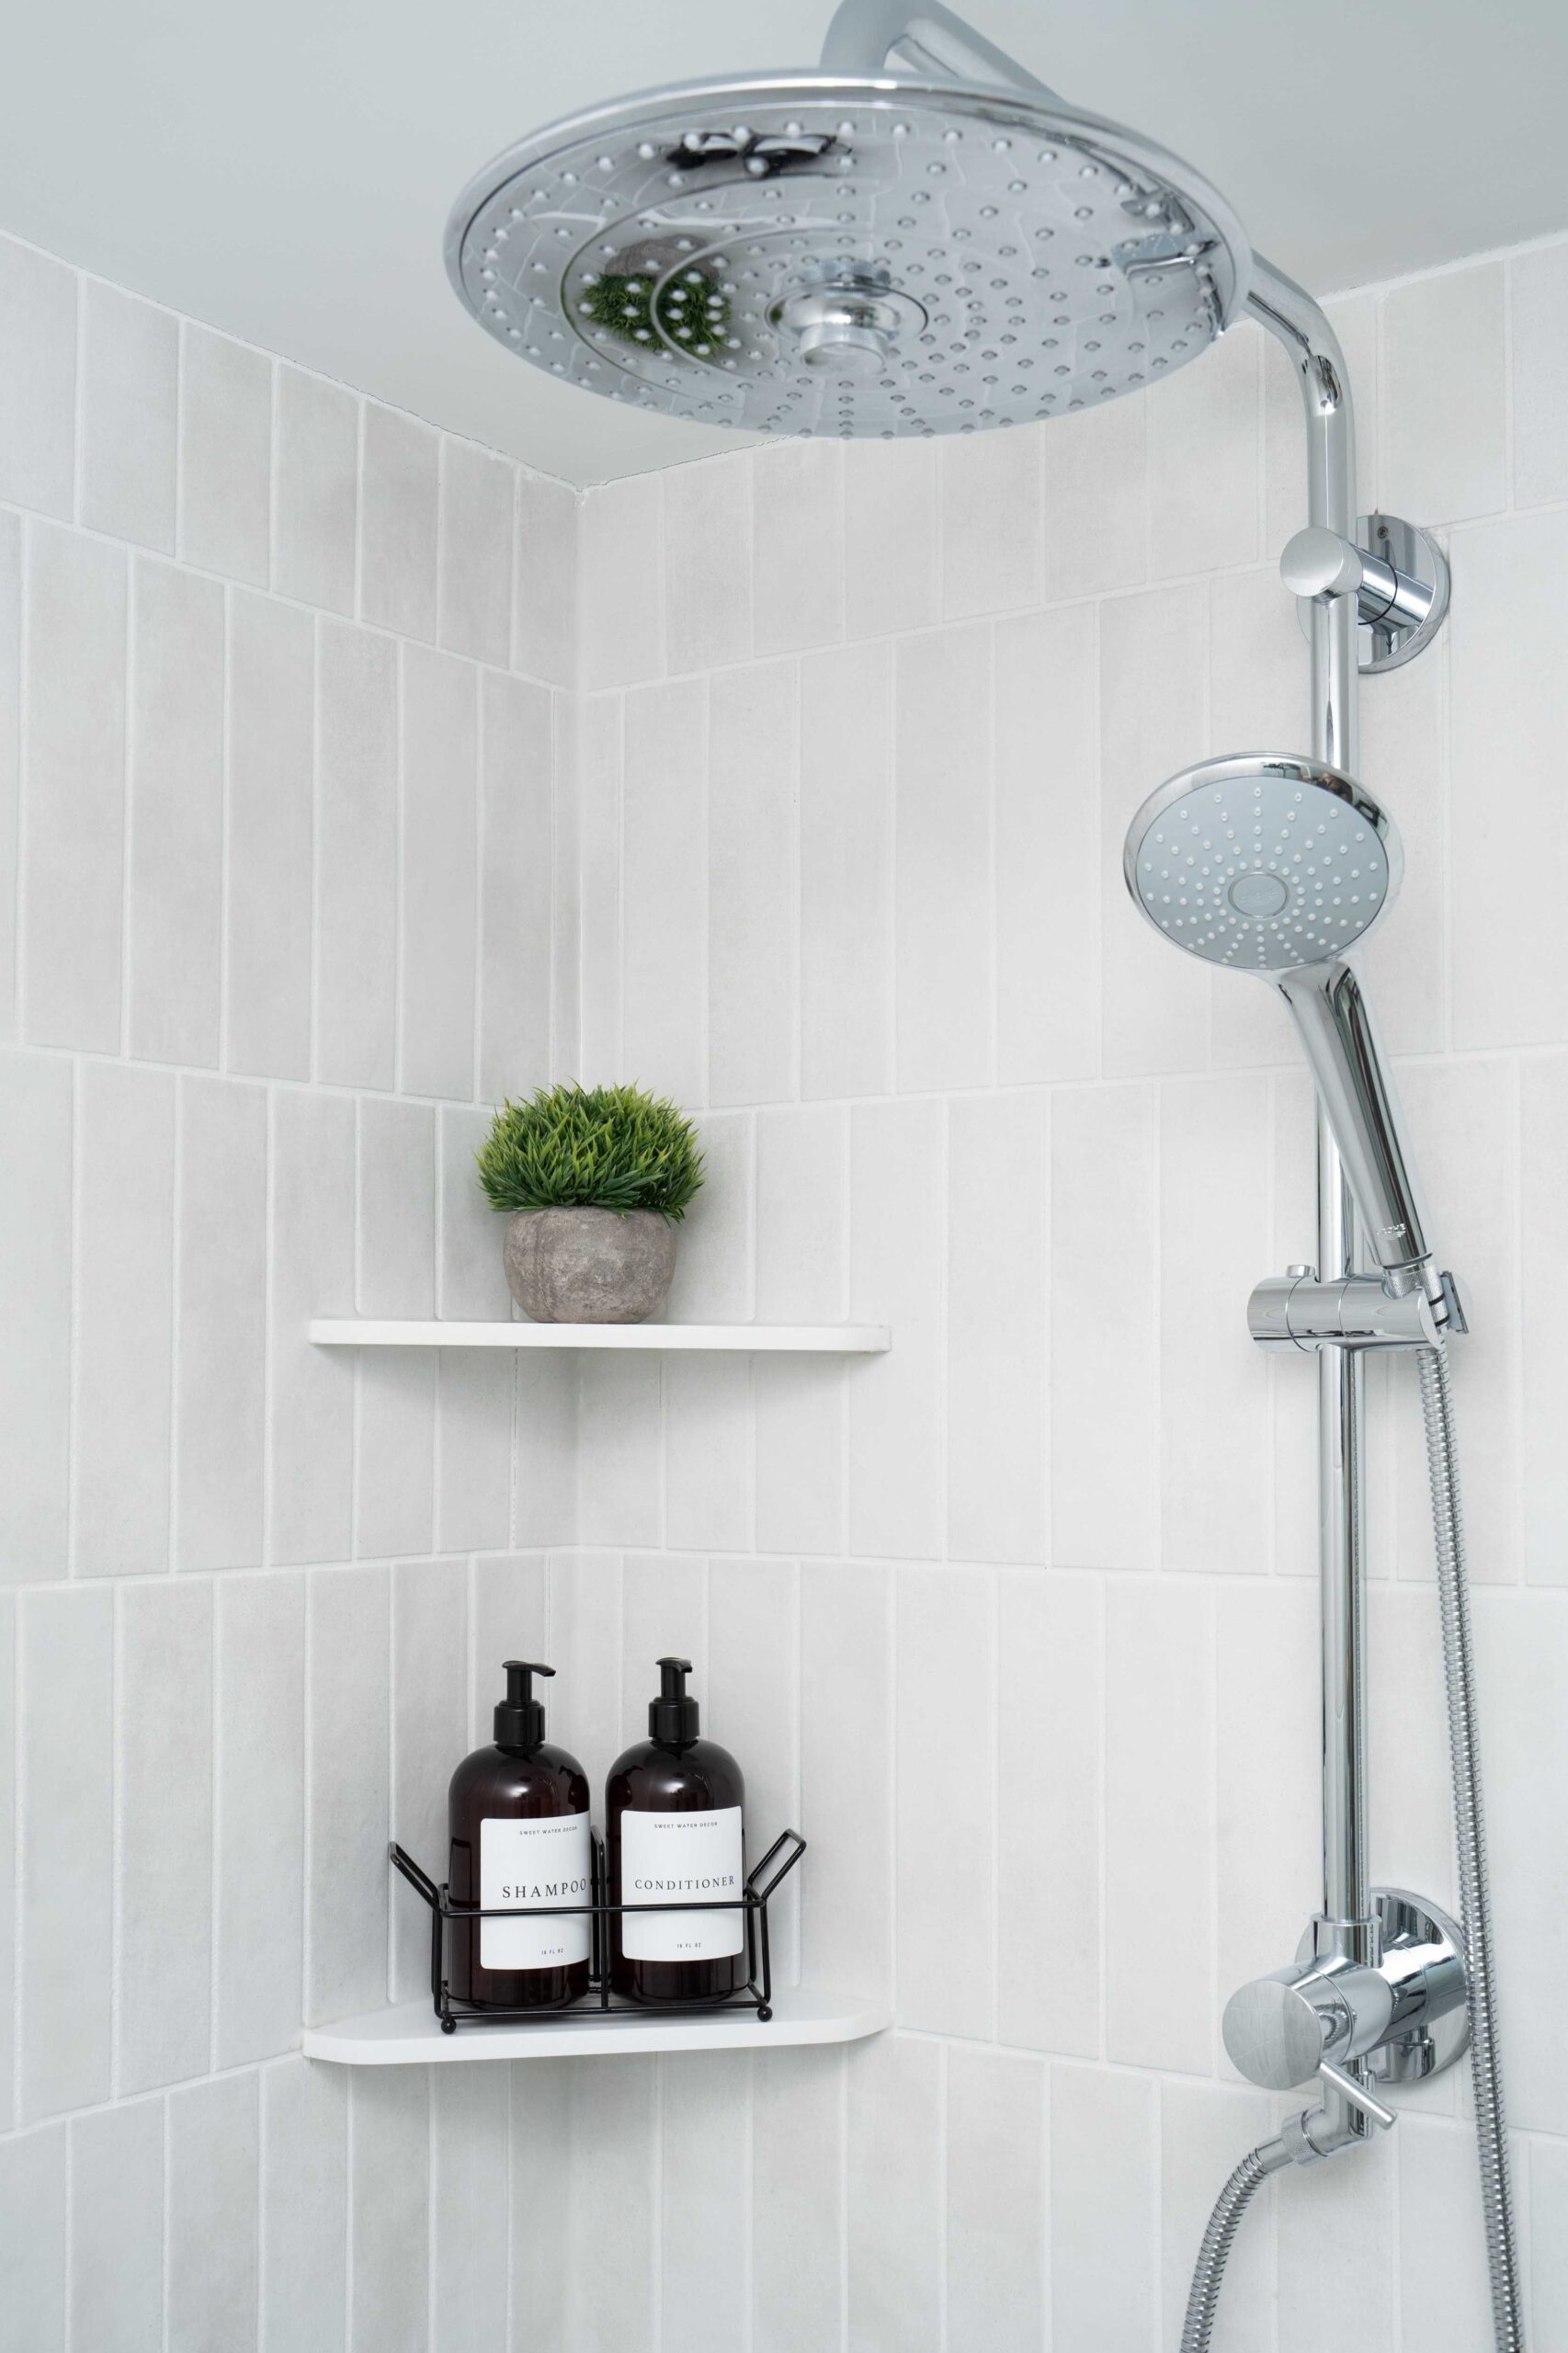 Orchard Lake Remodel: A bathroom with a shower head and a shelf.